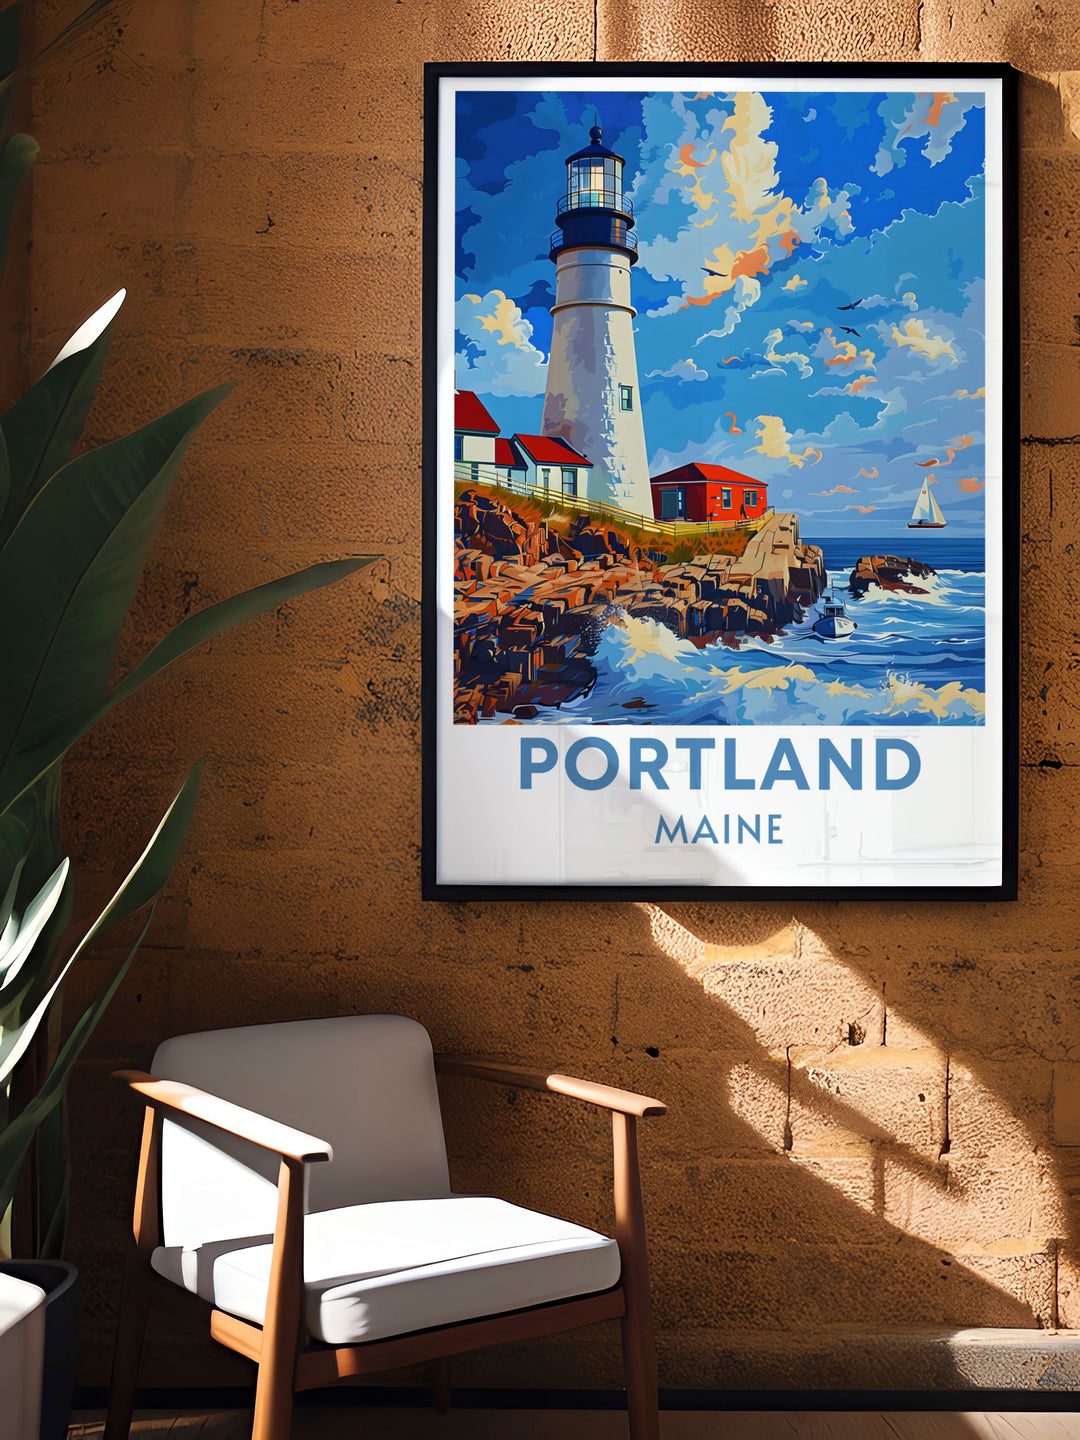 The historic streets of Portland, Maine, are featured in this travel poster, capturing the citys unique blend of old world charm and modern sophistication. Perfect for urban enthusiasts.